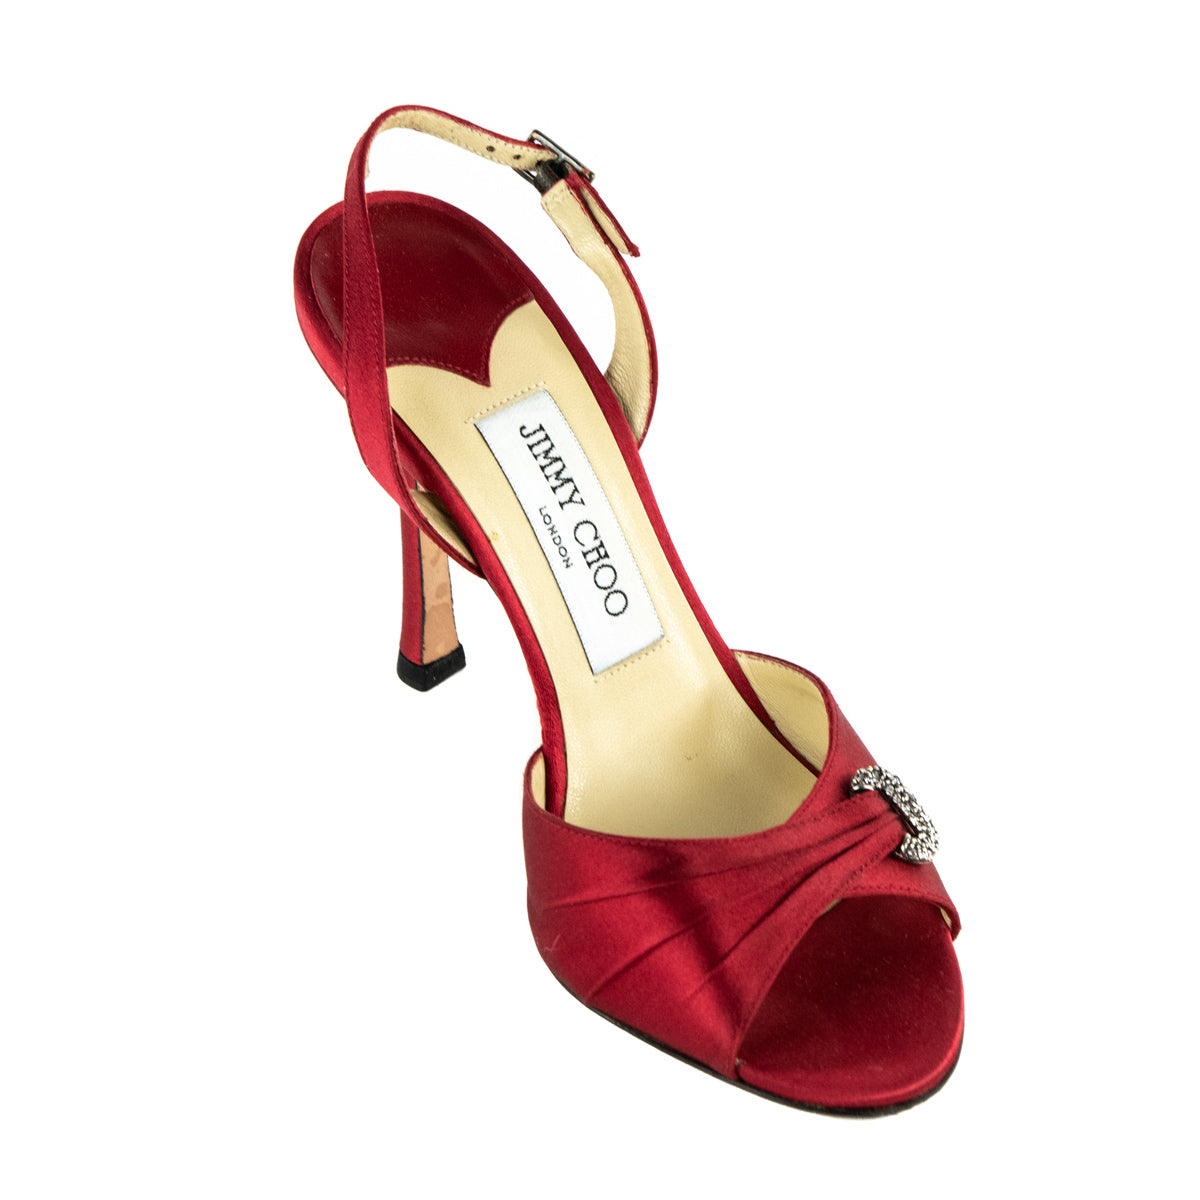 Jimmy Choo Red Satin Crystal Embellished Peep-Toe Pumps Size US 6 | EU 36 - Love that Bag etc - Preowned Authentic Designer Handbags & Preloved Fashions